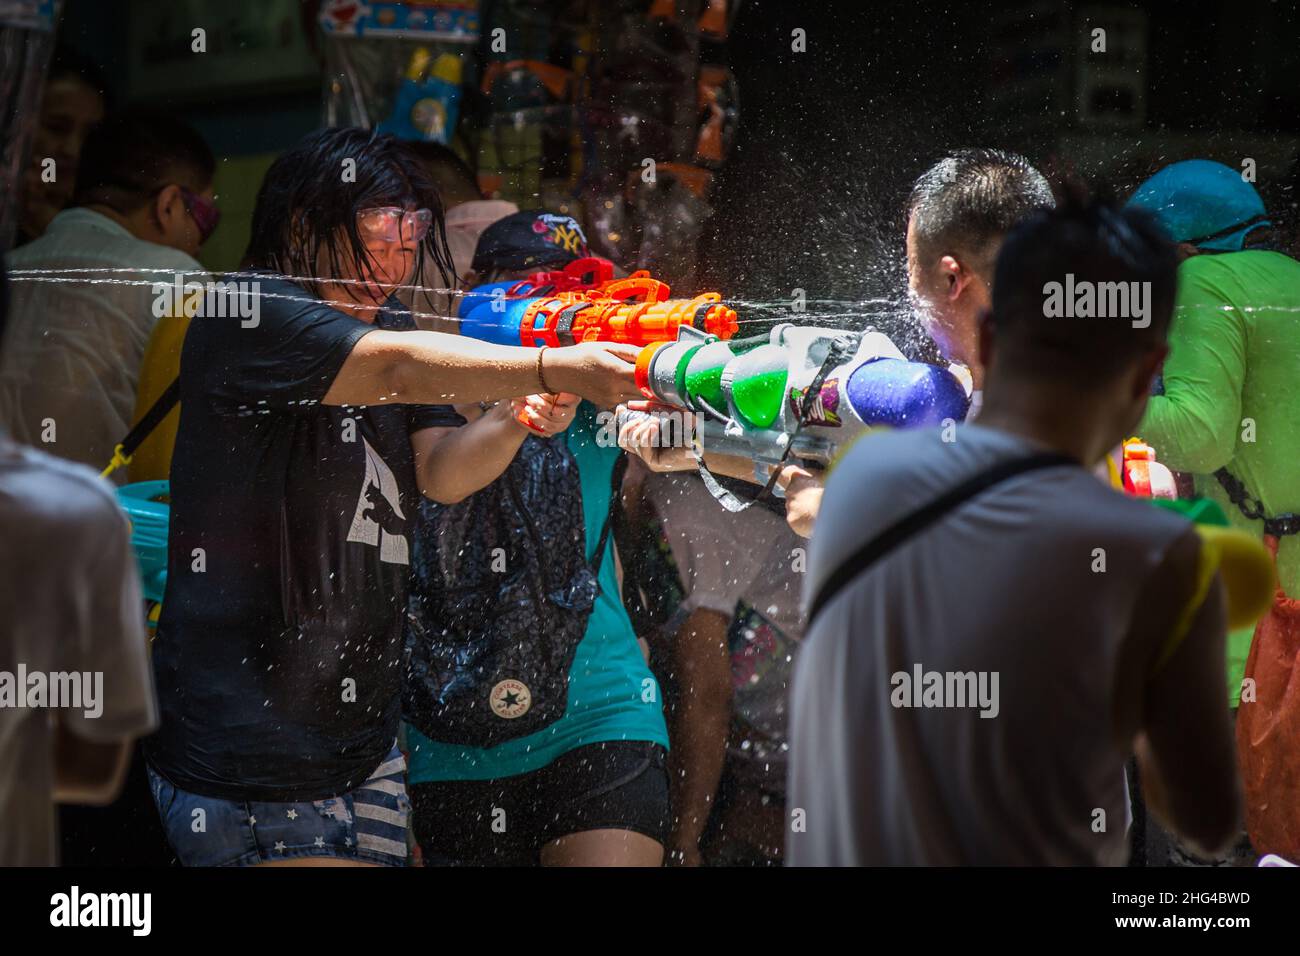 BANGKOK, THAILAND - APRIL 13, 2018: People on the streets of Bangkok celebrating first day of Songkran Festival, Thai New Year celebrations. Stock Photo